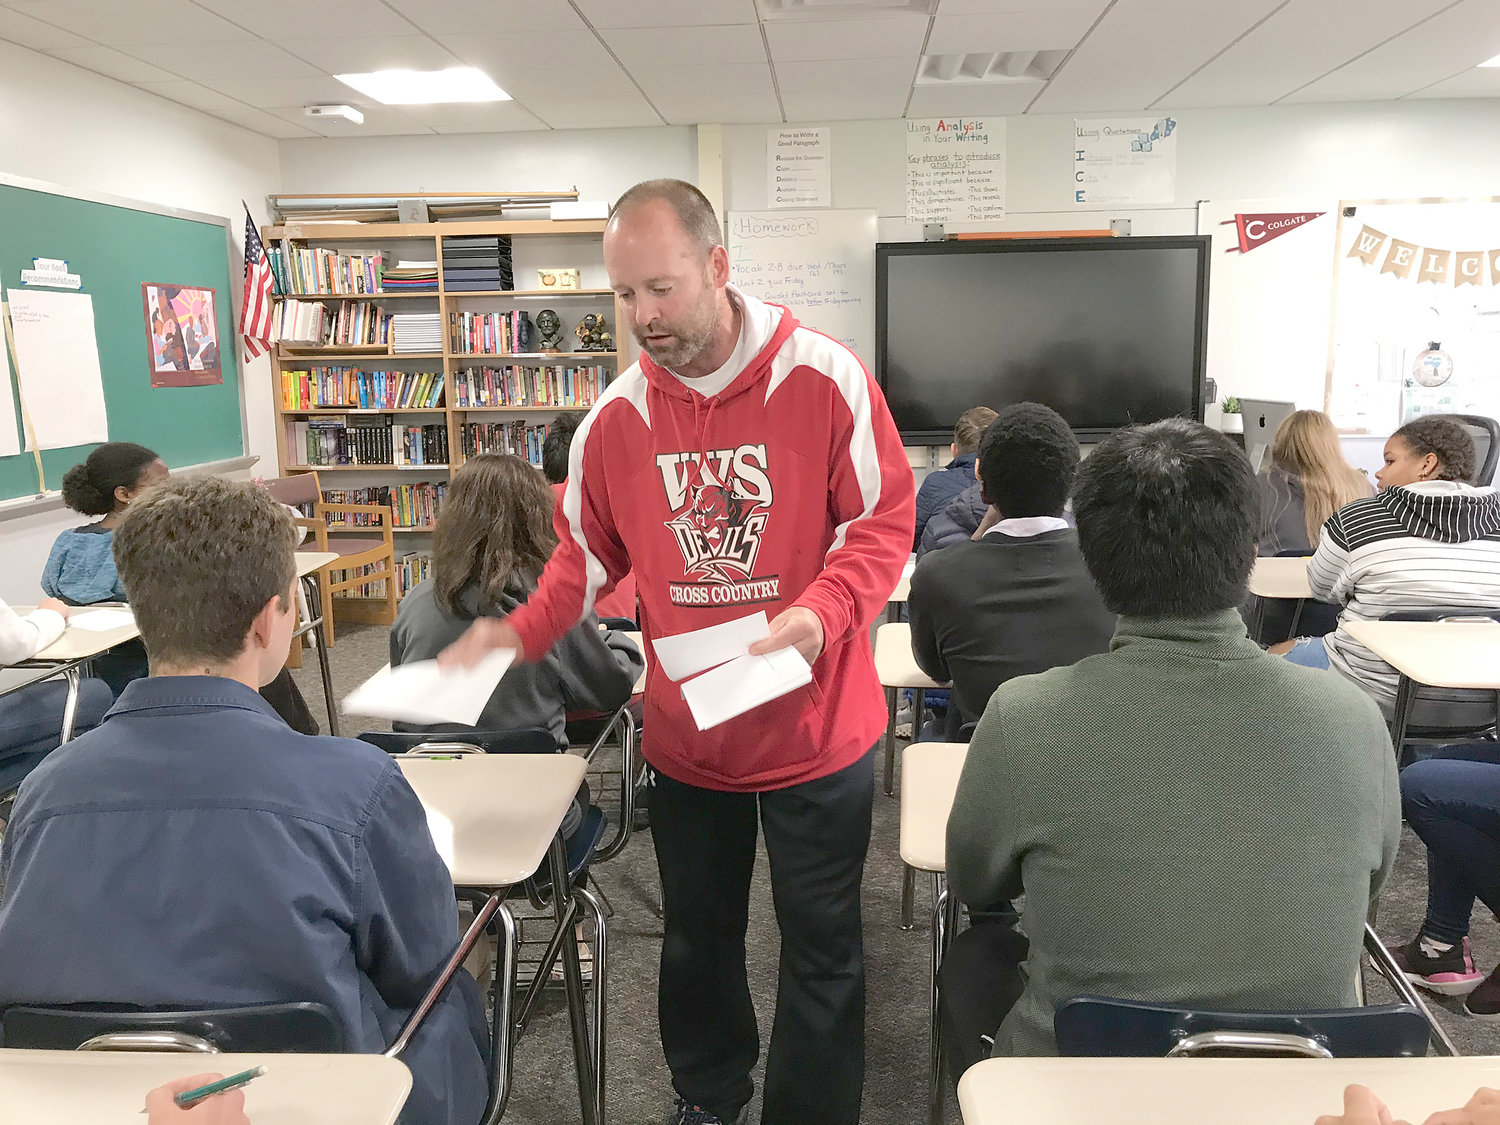 Vernon-Verona-Sherrill Central School Mathletics coach Michael Dunne passes out questions Oct. 15 during the relay race part of the morning’s competition at Hamilton Central School ... just like it was done more than 40 years ago.